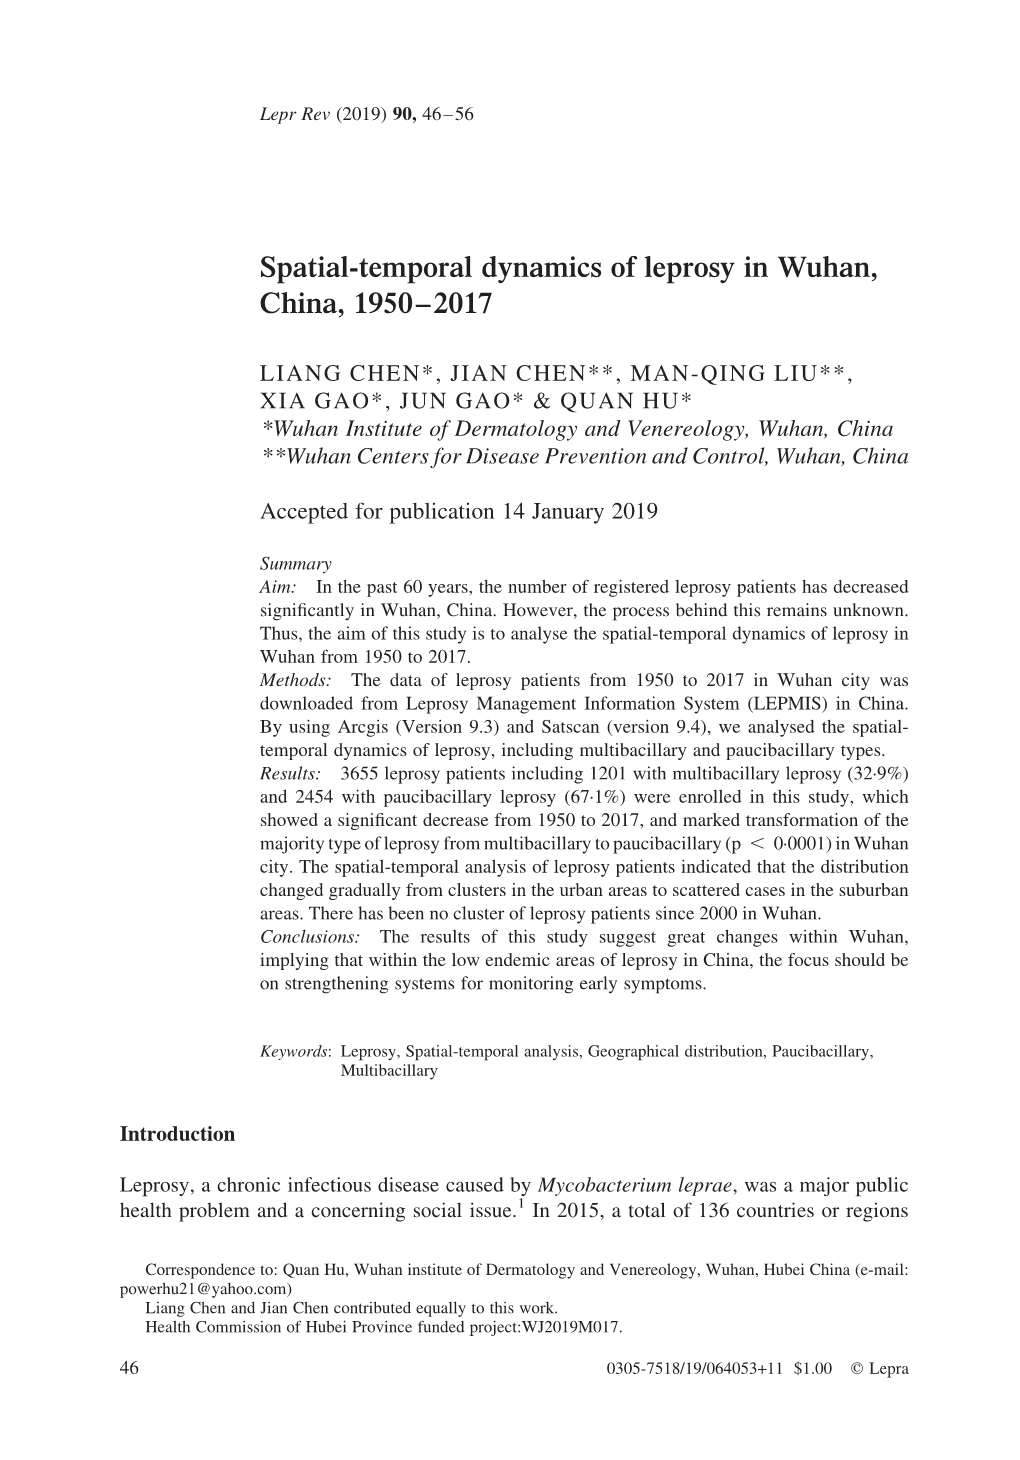 Spatial-Temporal Dynamics of Leprosy in Wuhan, China, 1950–2017